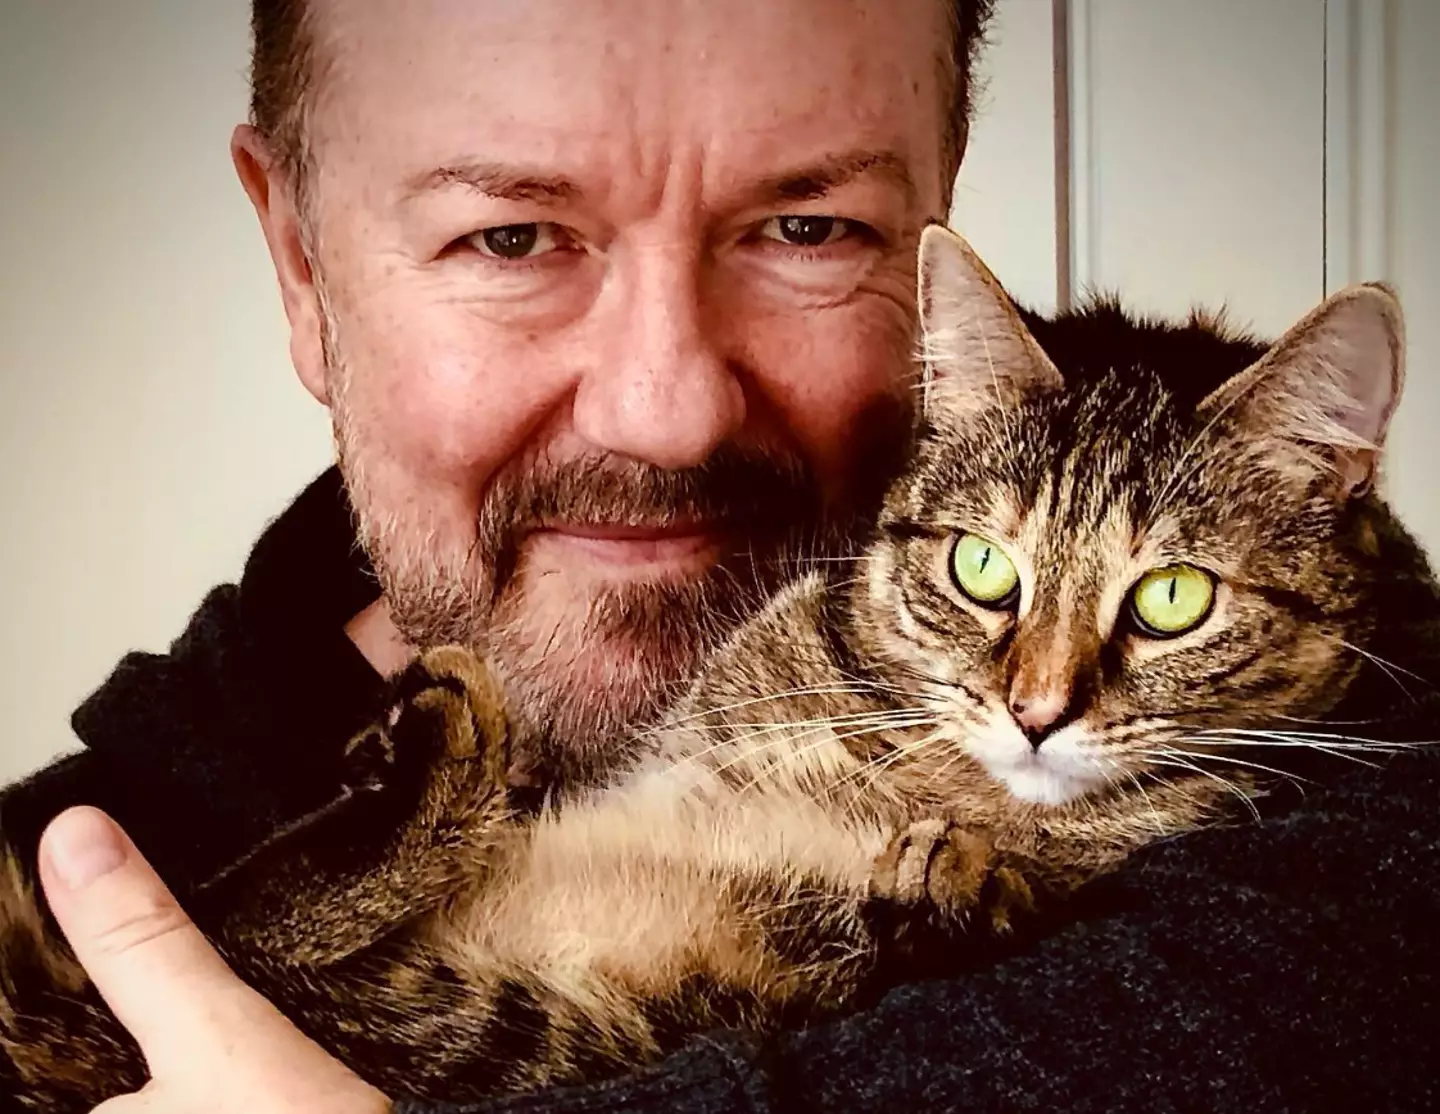 It sounds like Ricky Gervais needed some comforting while he was ill.